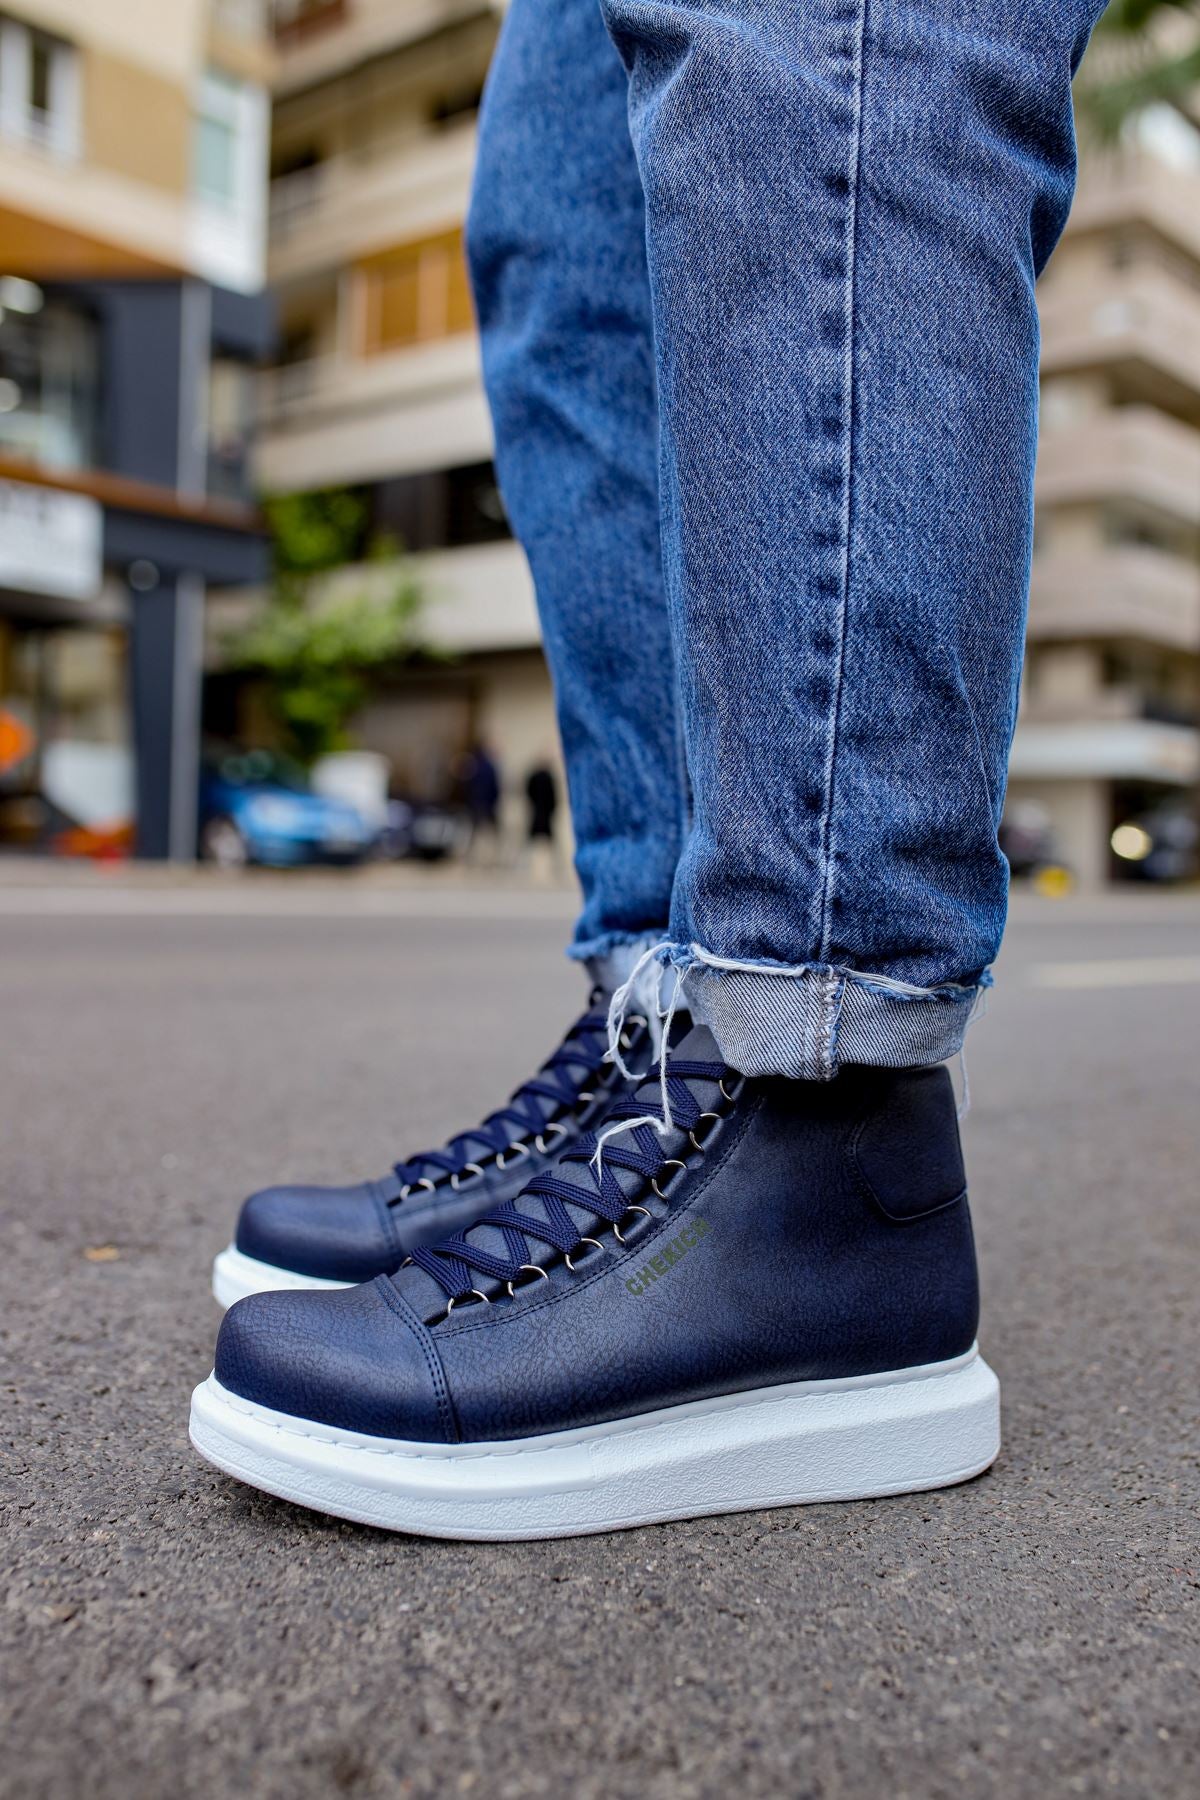 CH258 Men's Navy Blue-White Sole Metal Slug Lace-up High Sole Casual Sneaker Sports Boots - STREETMODE™